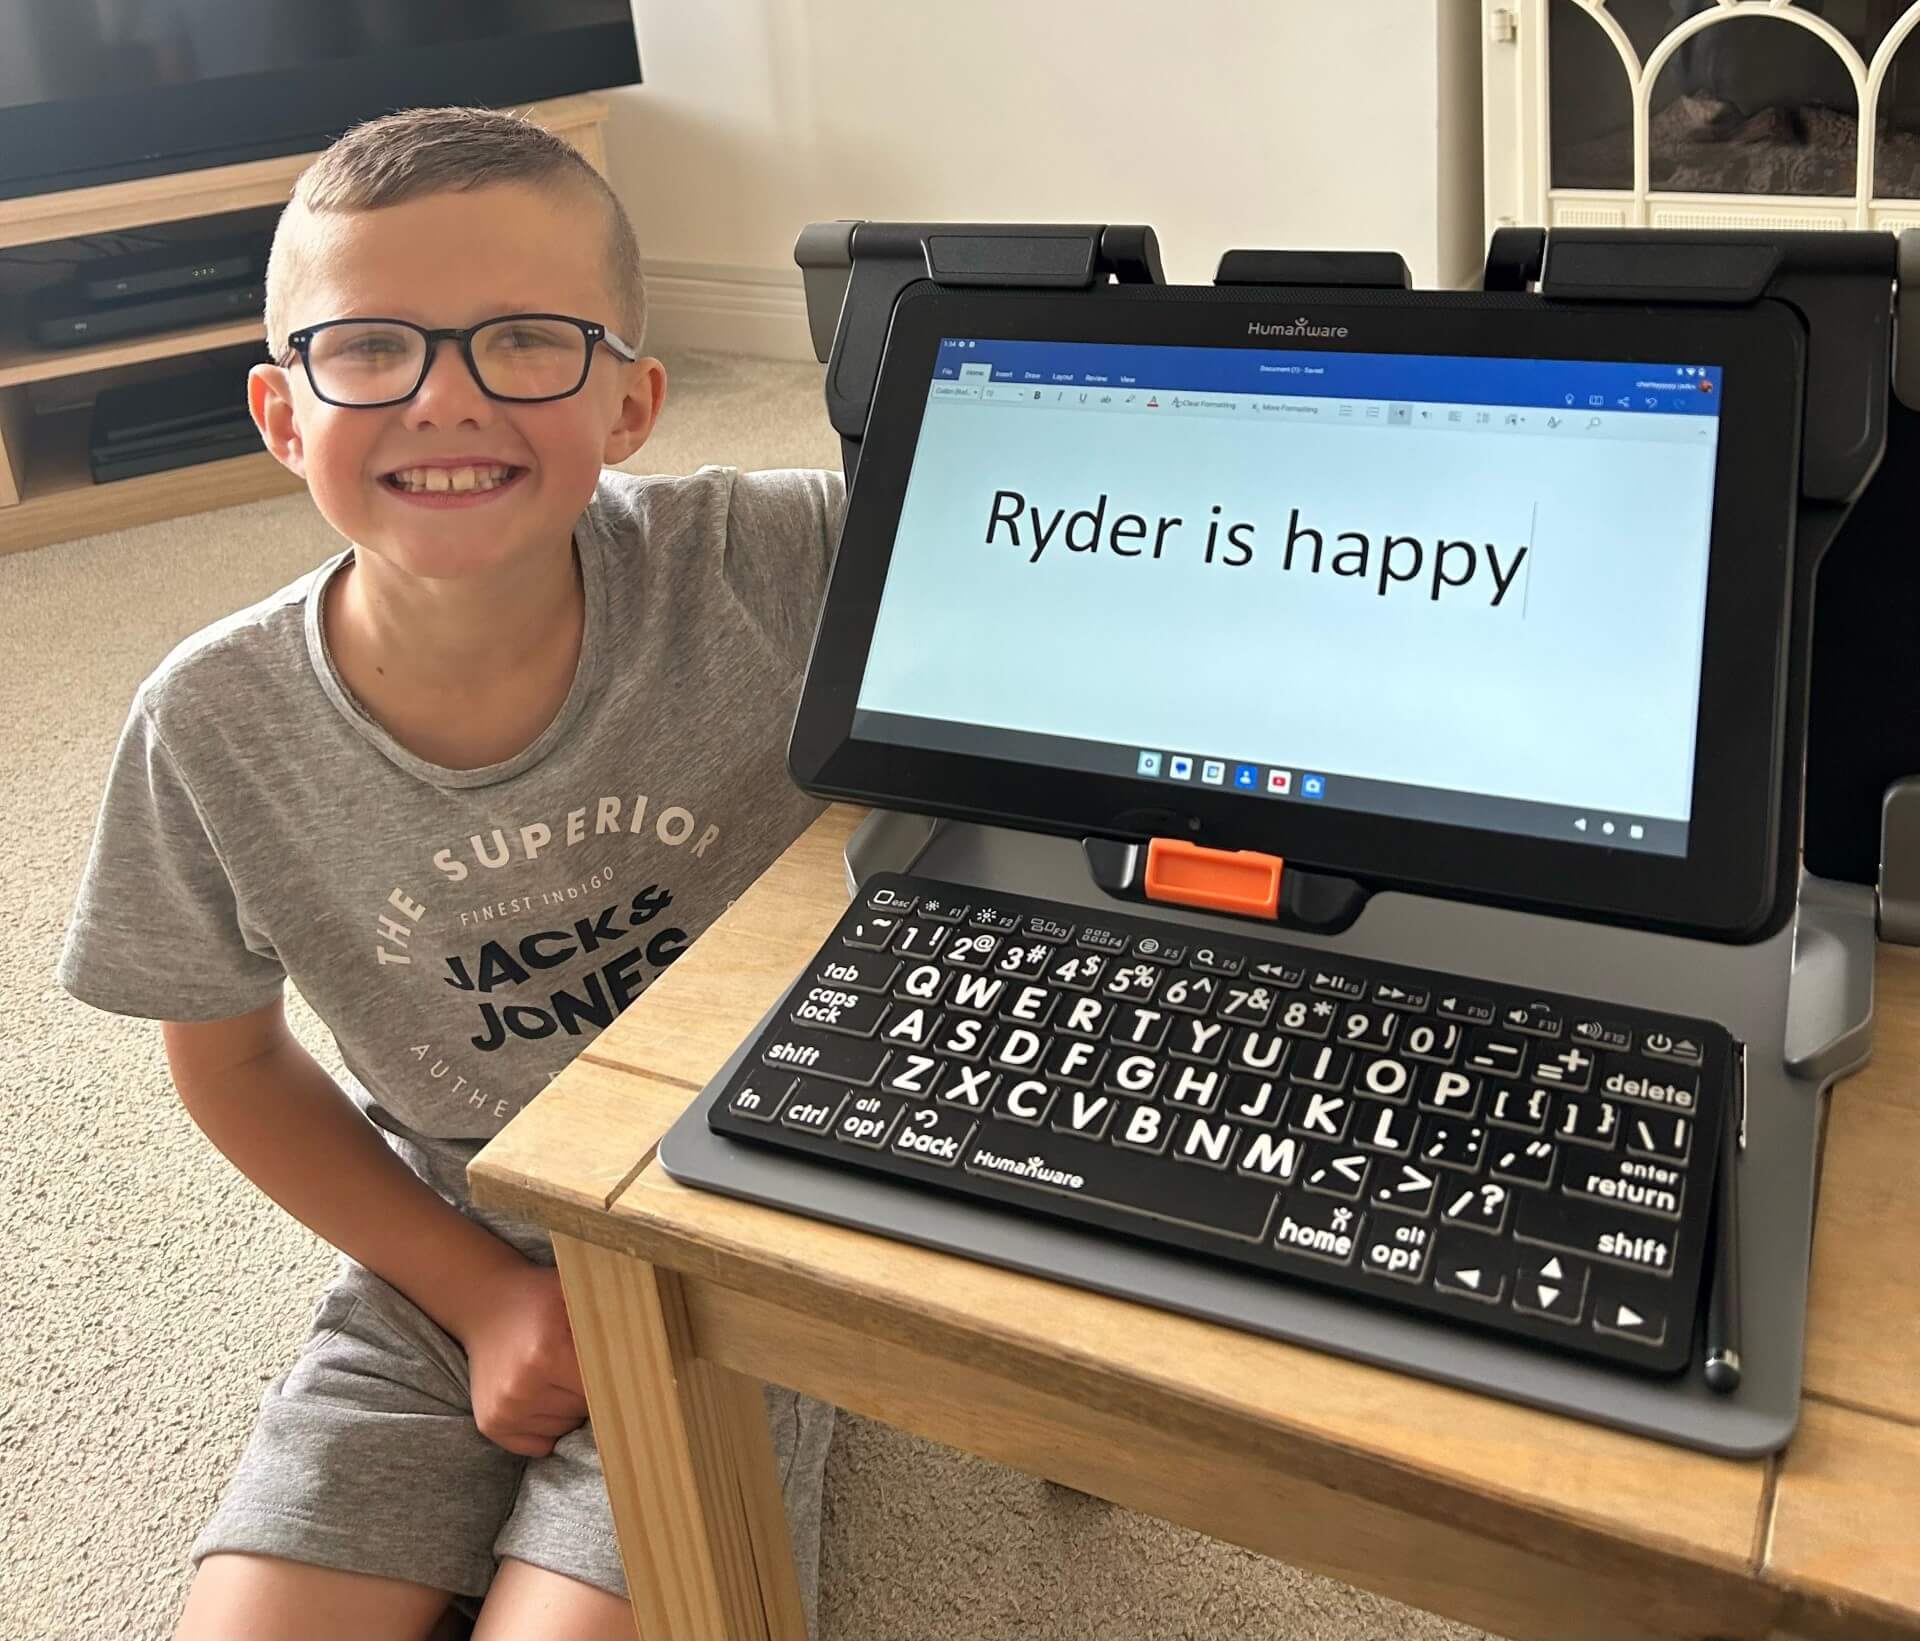 boy looking very happy with his new computer